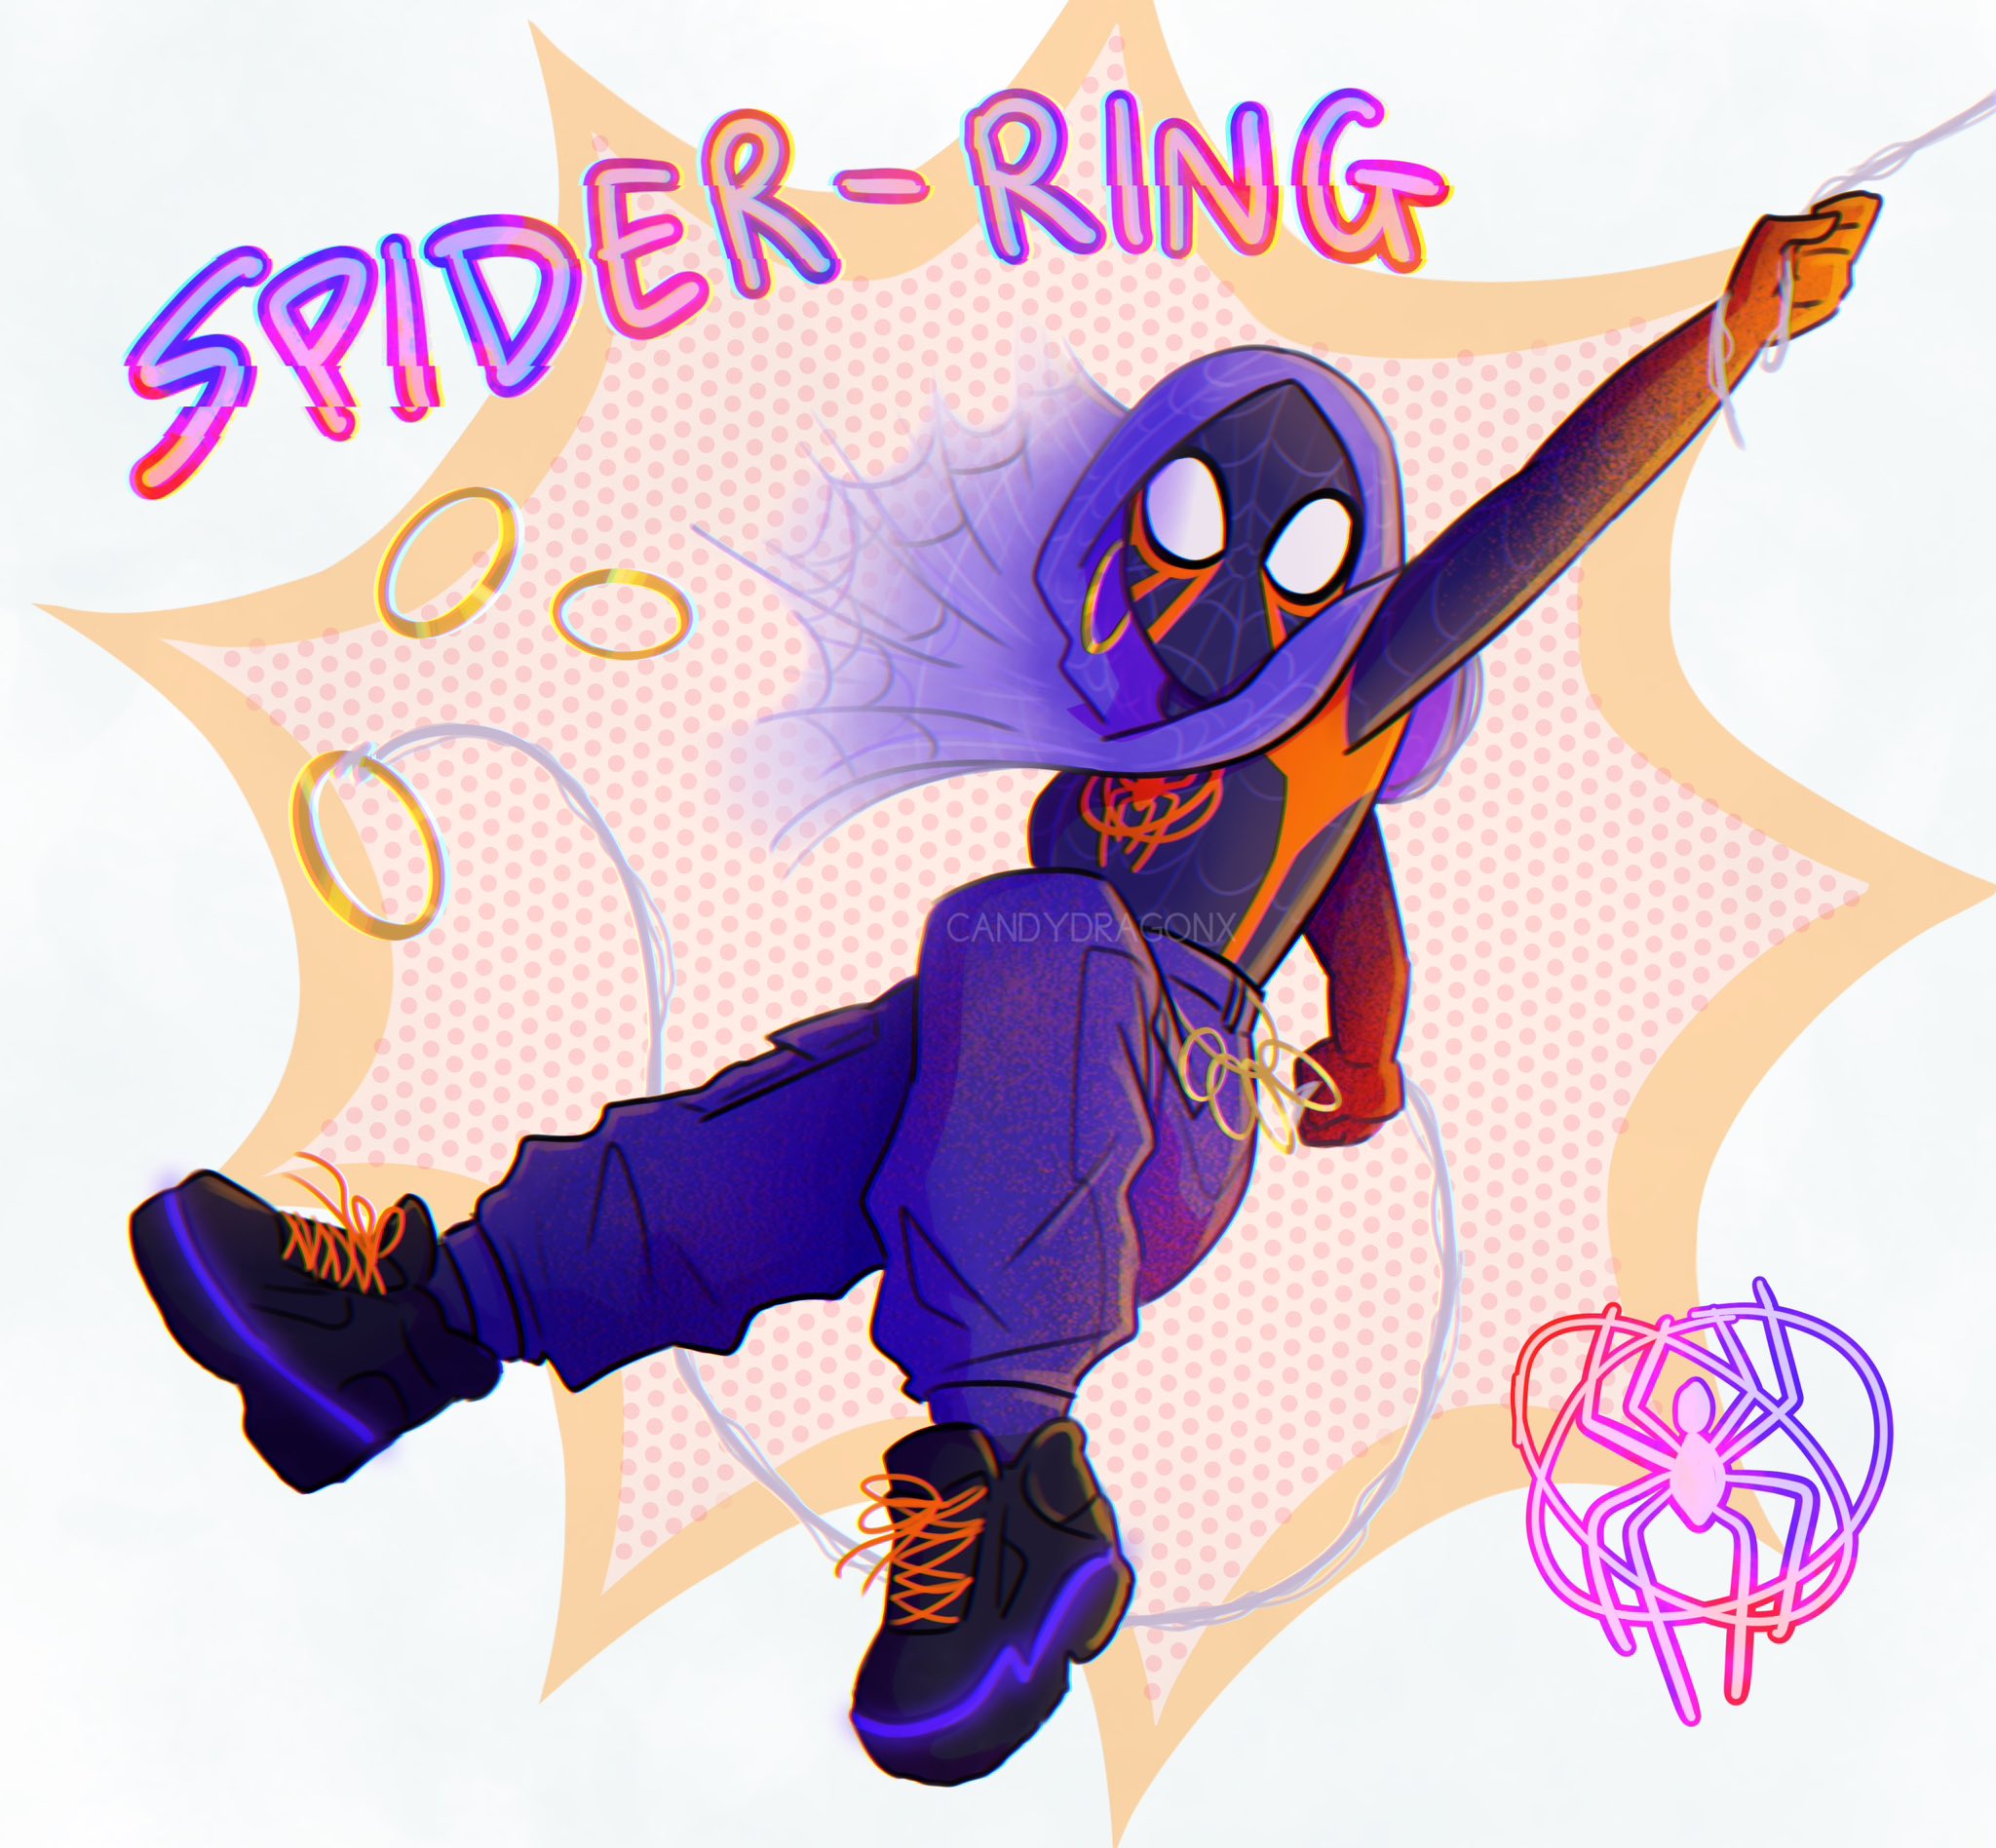 Uses for Spider Rings